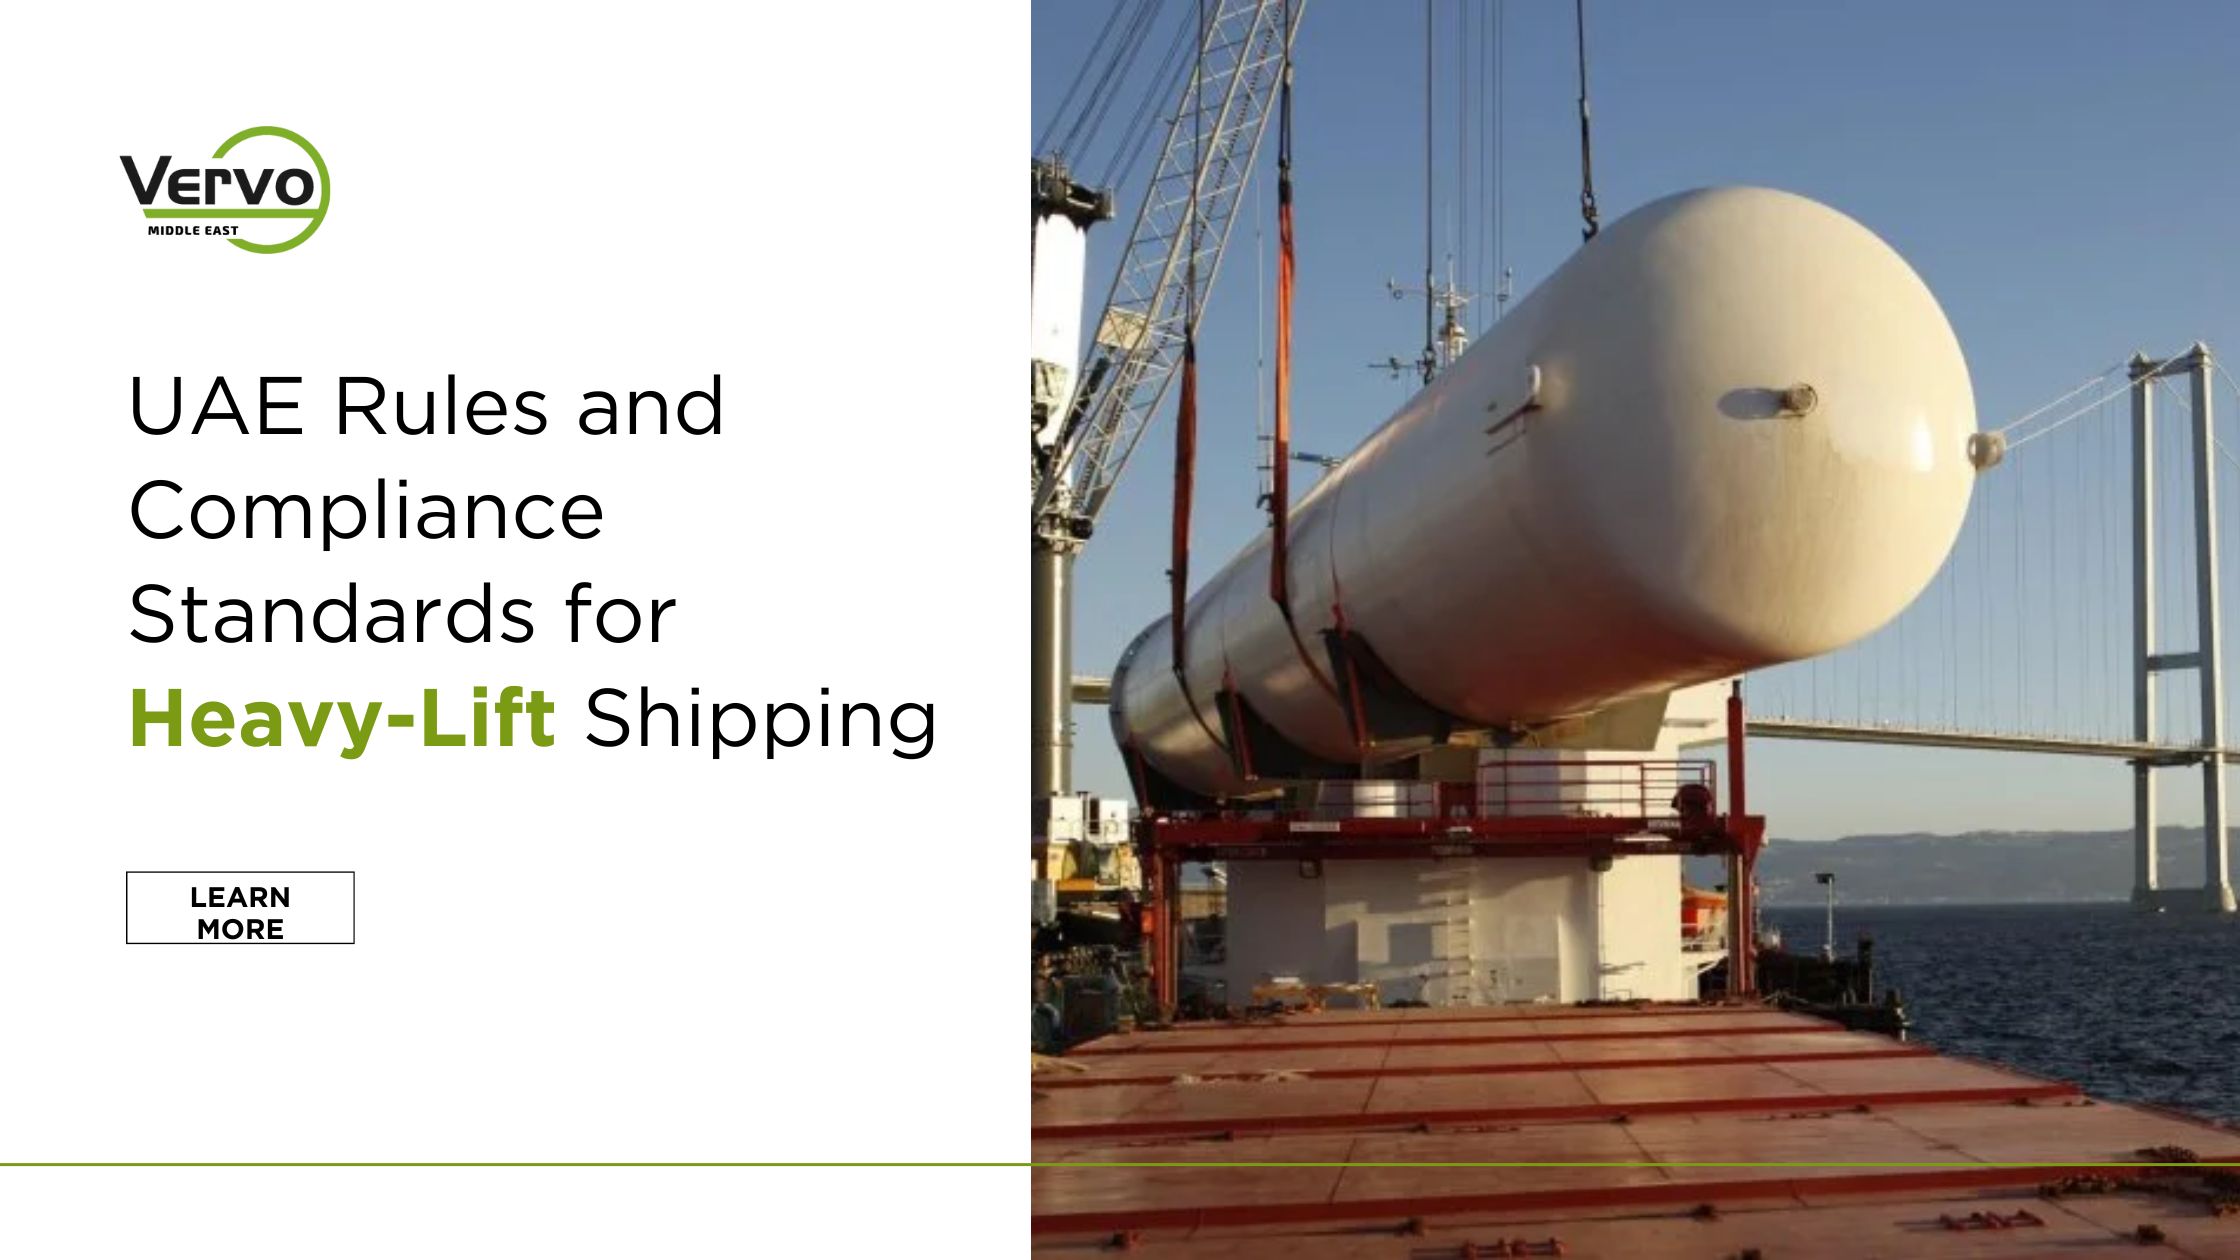 UAE Rules and Compliance Standards for Heavy-Lift Shipping By Vervo Middle East for logistics services in the UAE and Dubai